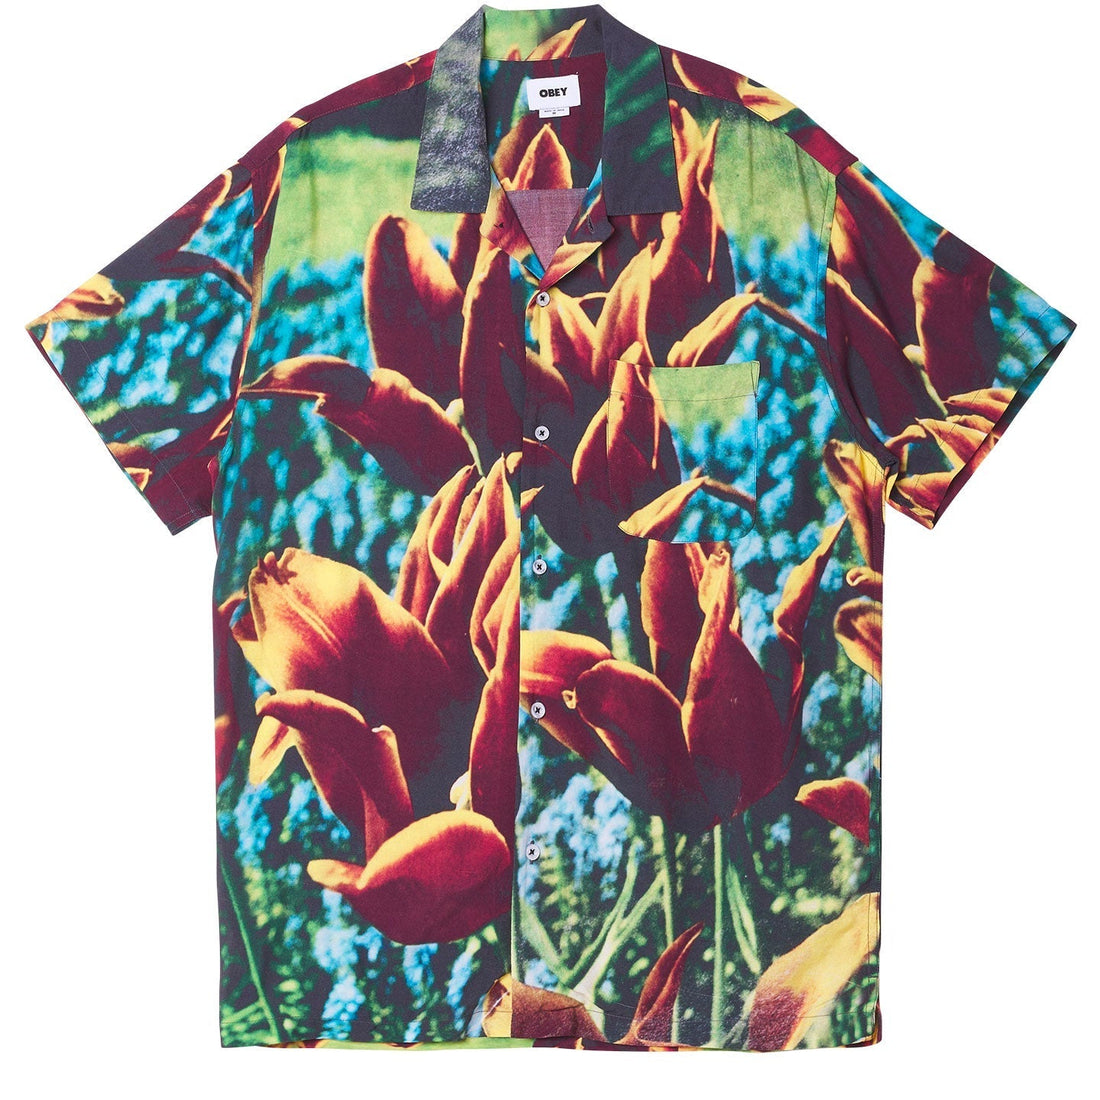 OBEY • Chemise Bloom Hauts 